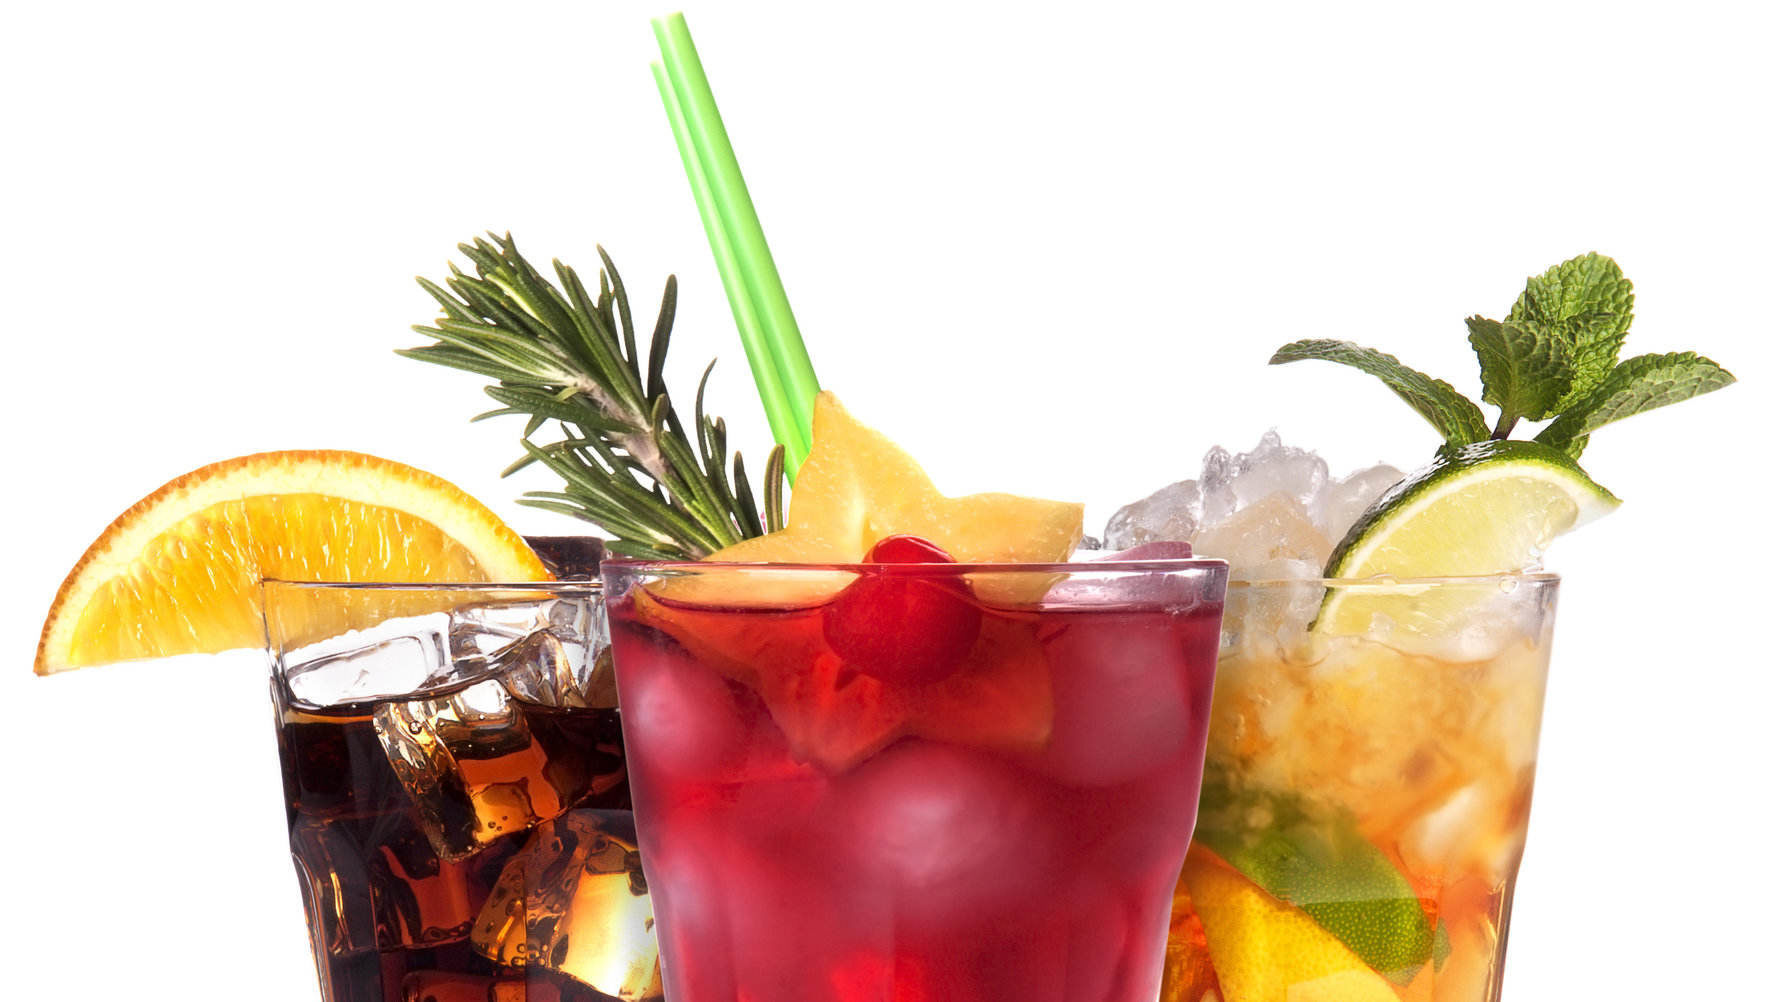 Liqueurs have the potential to make considerable sales ground over the next few years as their use in cocktails becomes even more widespread.